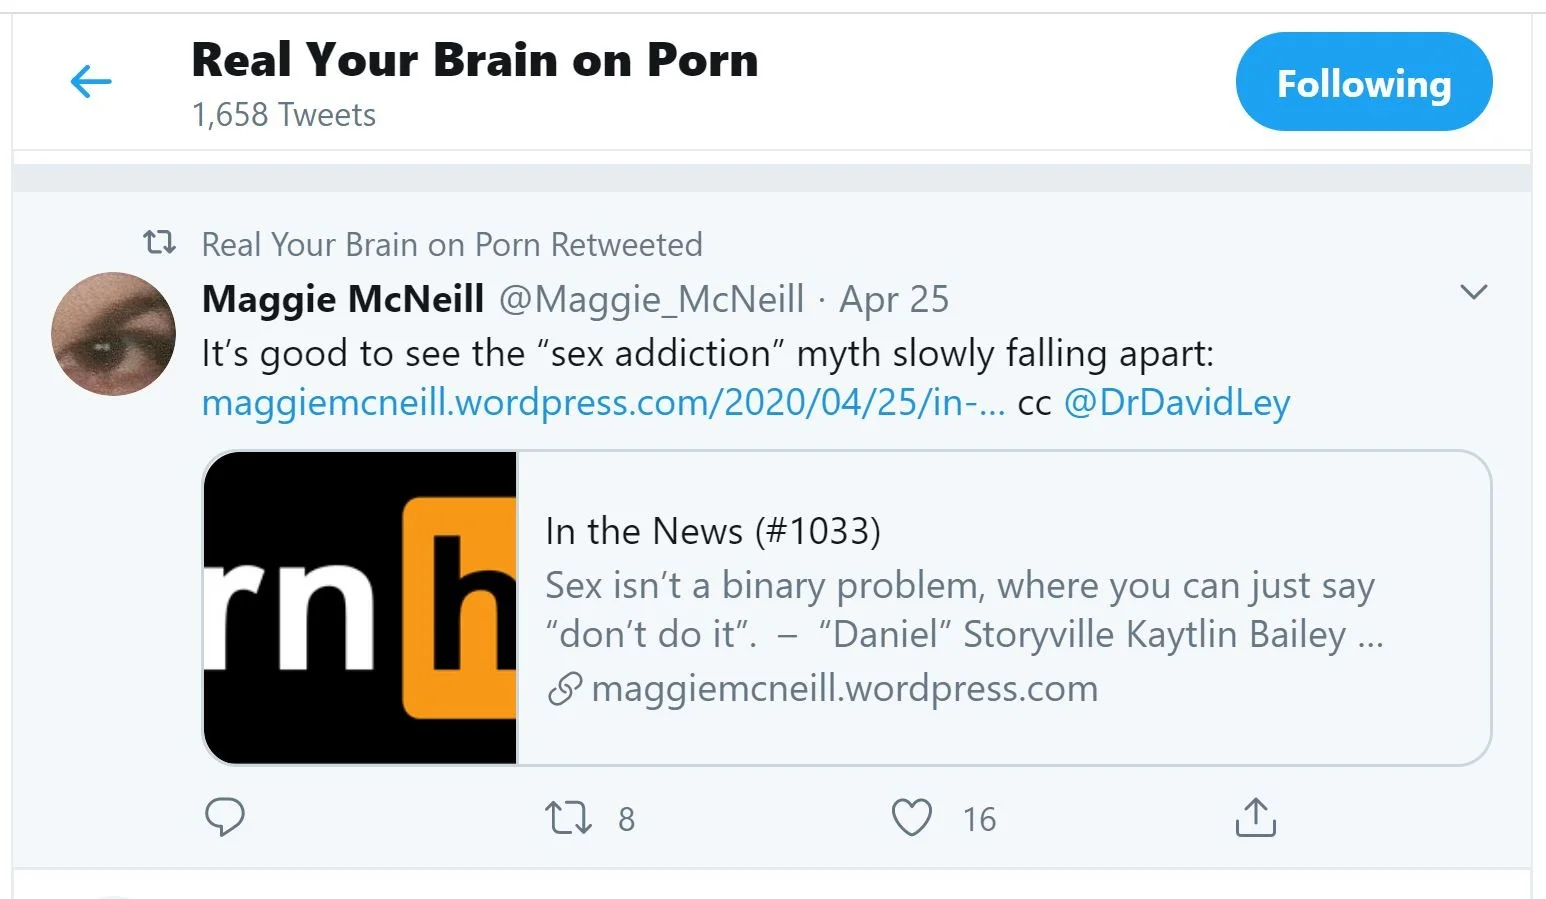 RealYourBrainOnPorn (@BrainOnPorn) tweets DIRECTLY supporting the porn industry, especially Pornhub